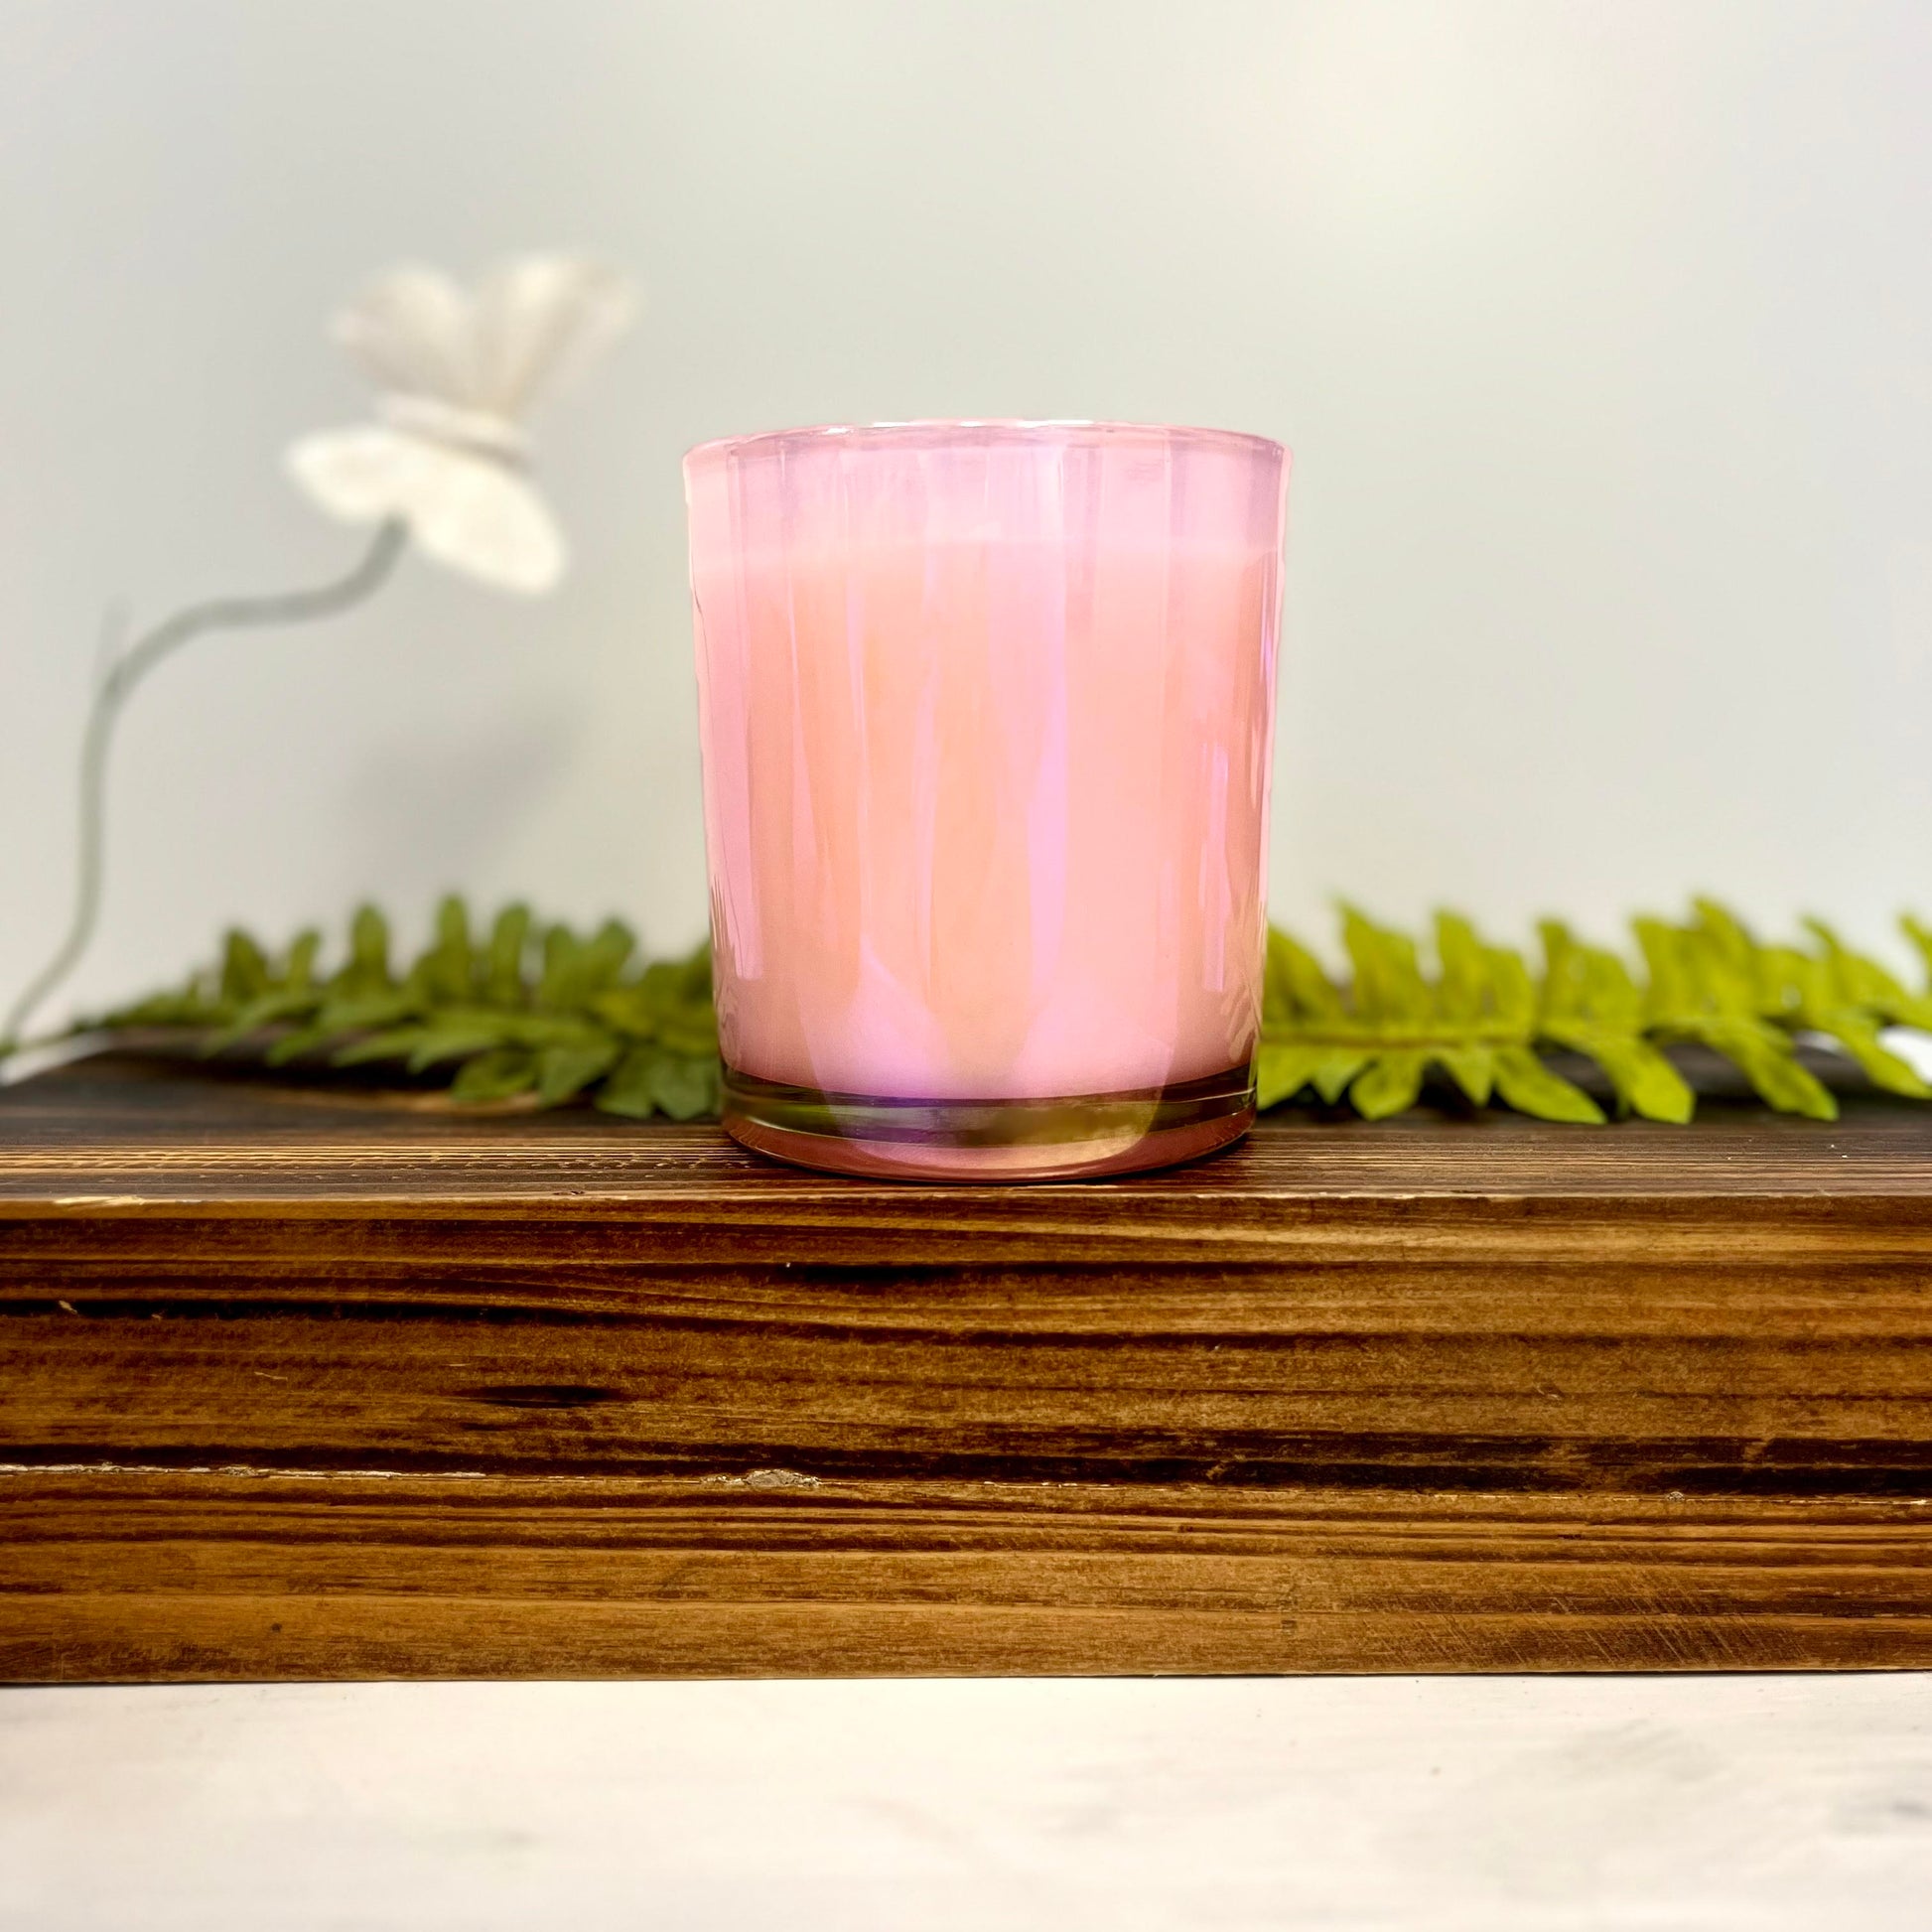 Custom Scented Crystal Candle - The Blush Jar